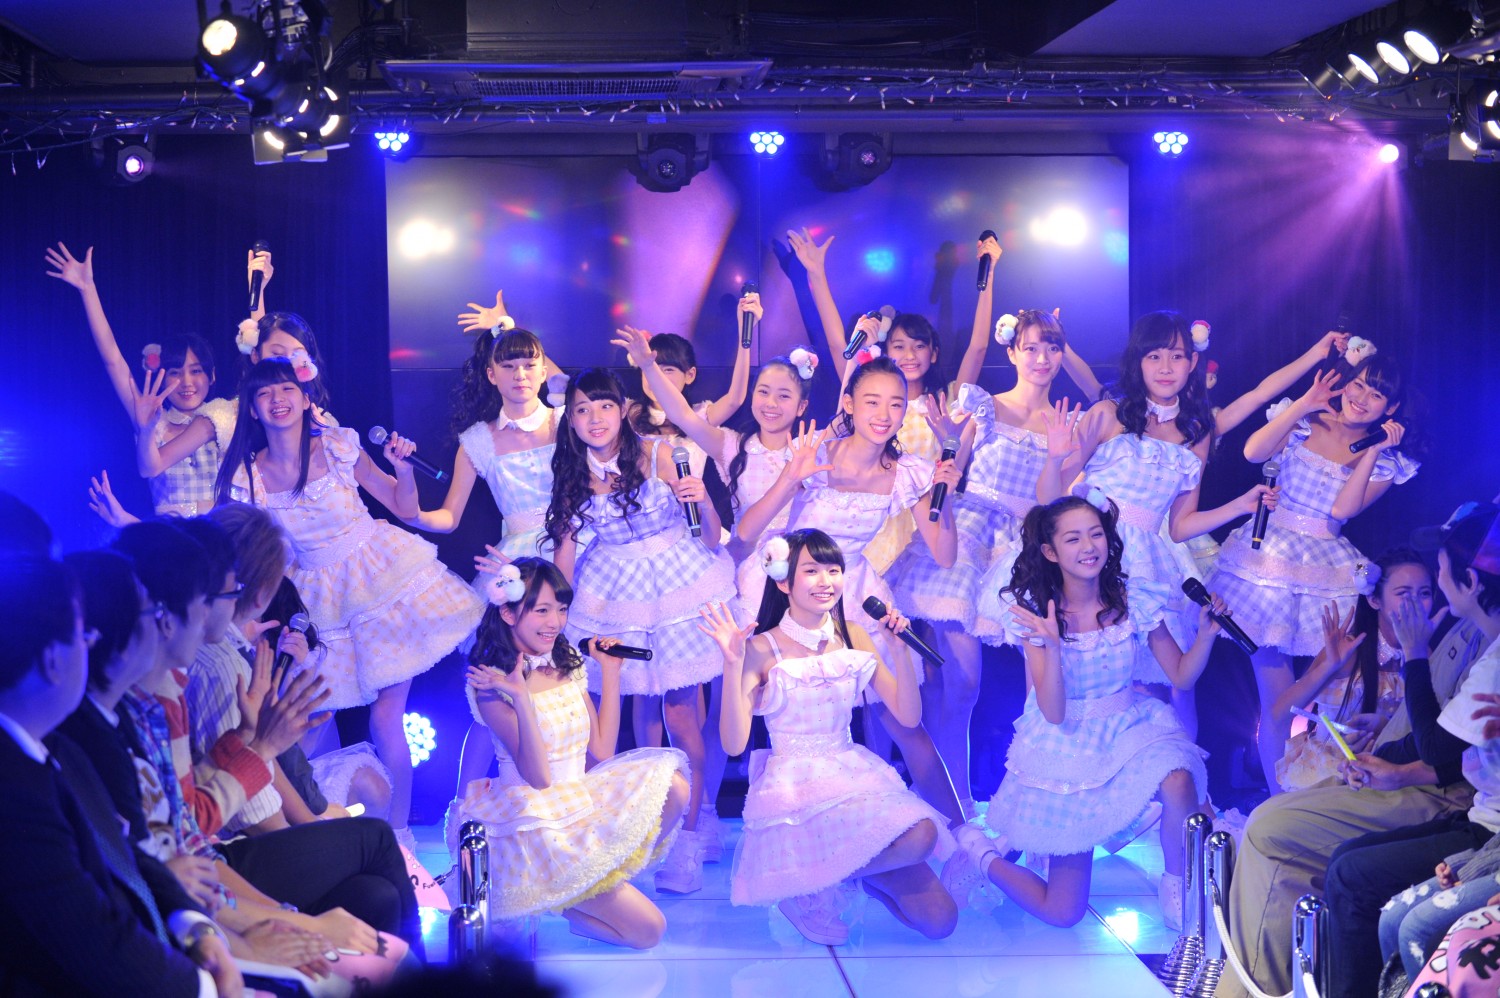 “Heaven on Earth” : Enjoy Entertaining Parties Day and Night at Harajuku Ekimae Stage!